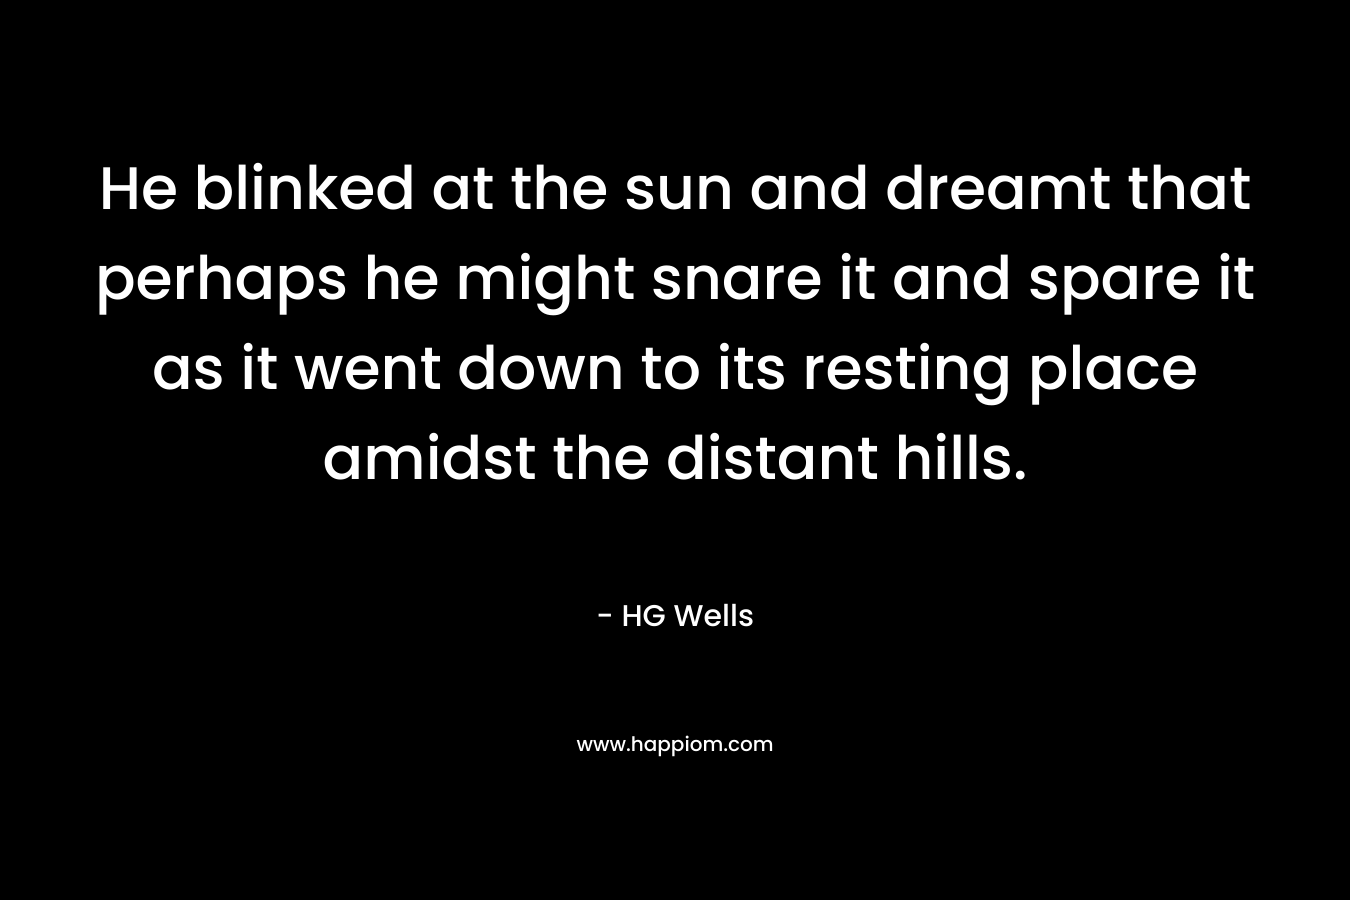 He blinked at the sun and dreamt that perhaps he might snare it and spare it as it went down to its resting place amidst the distant hills. – HG Wells